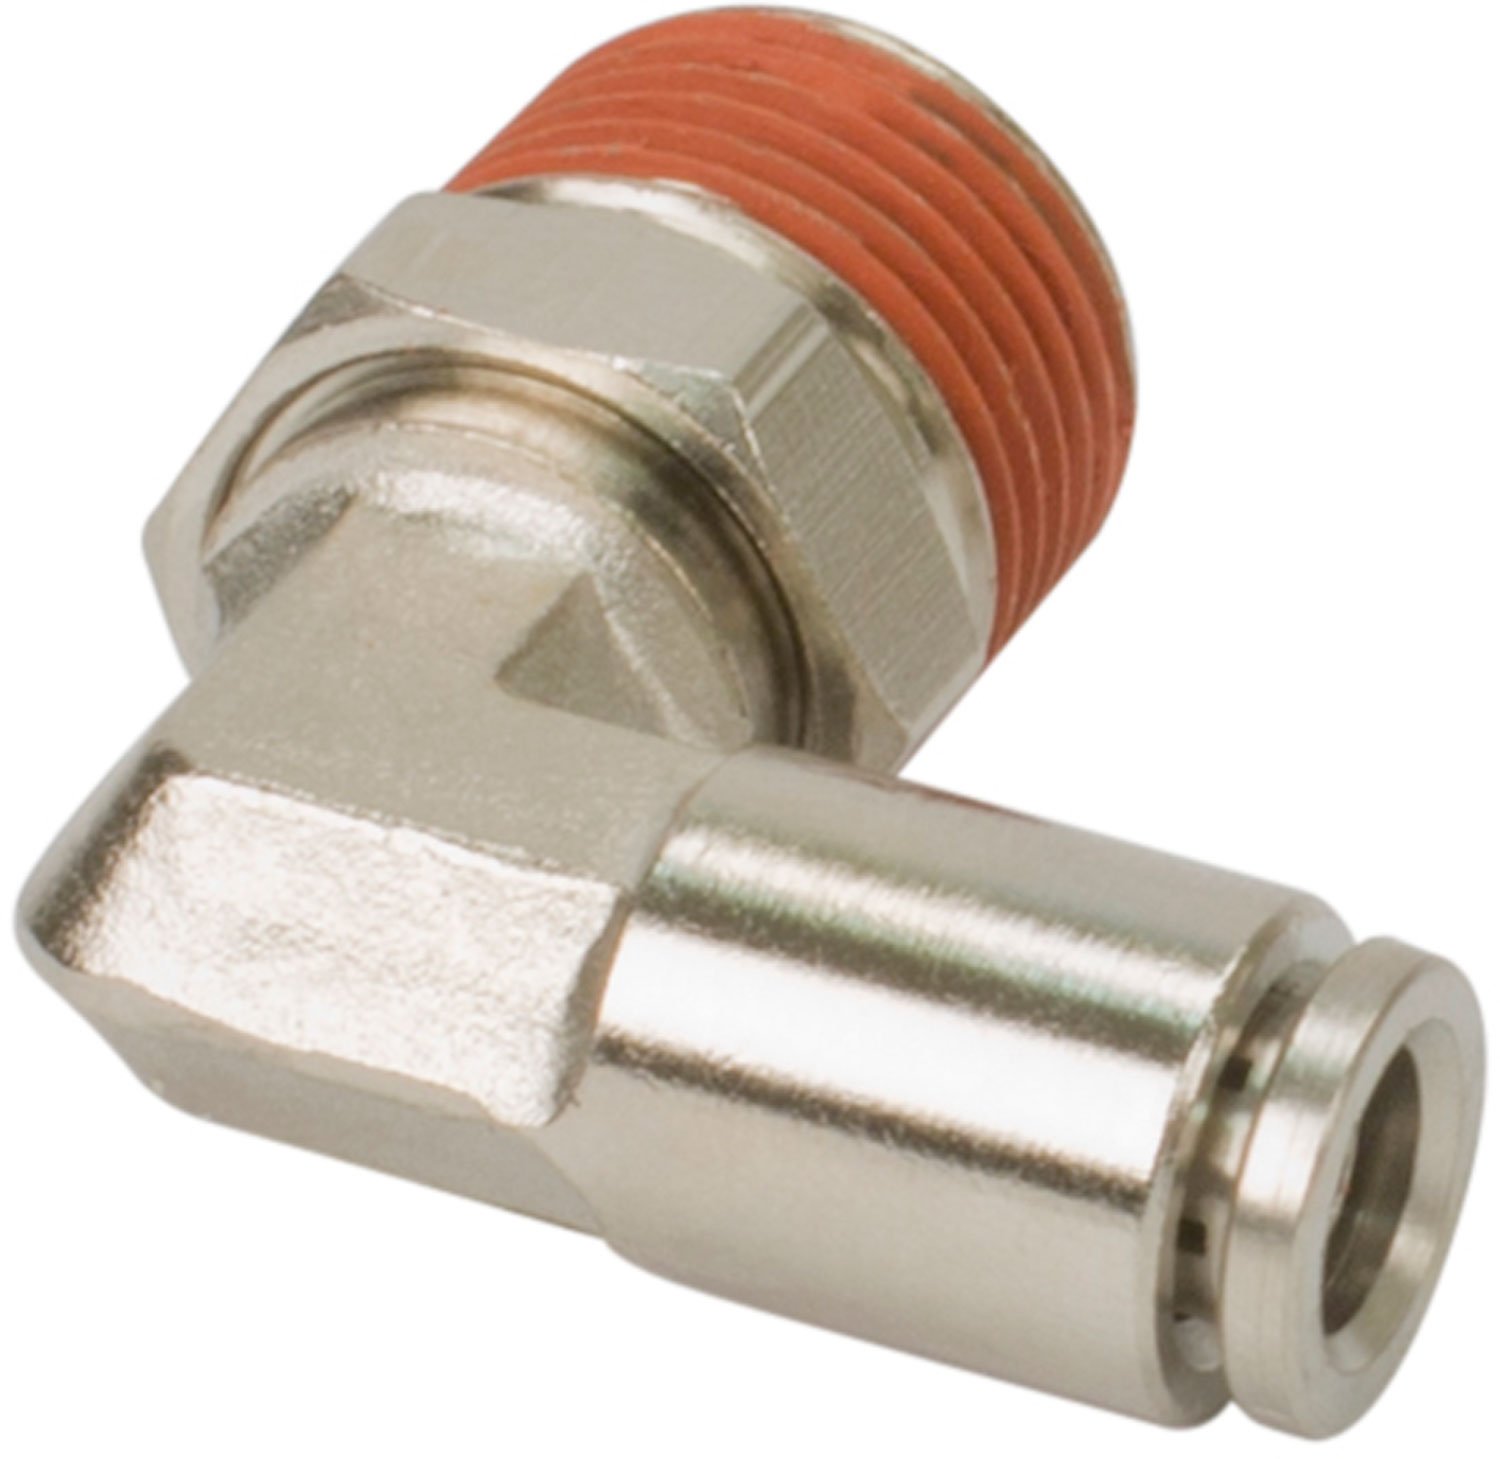 Swivel 90 Degree Elbow Push-to-Connect Fitting